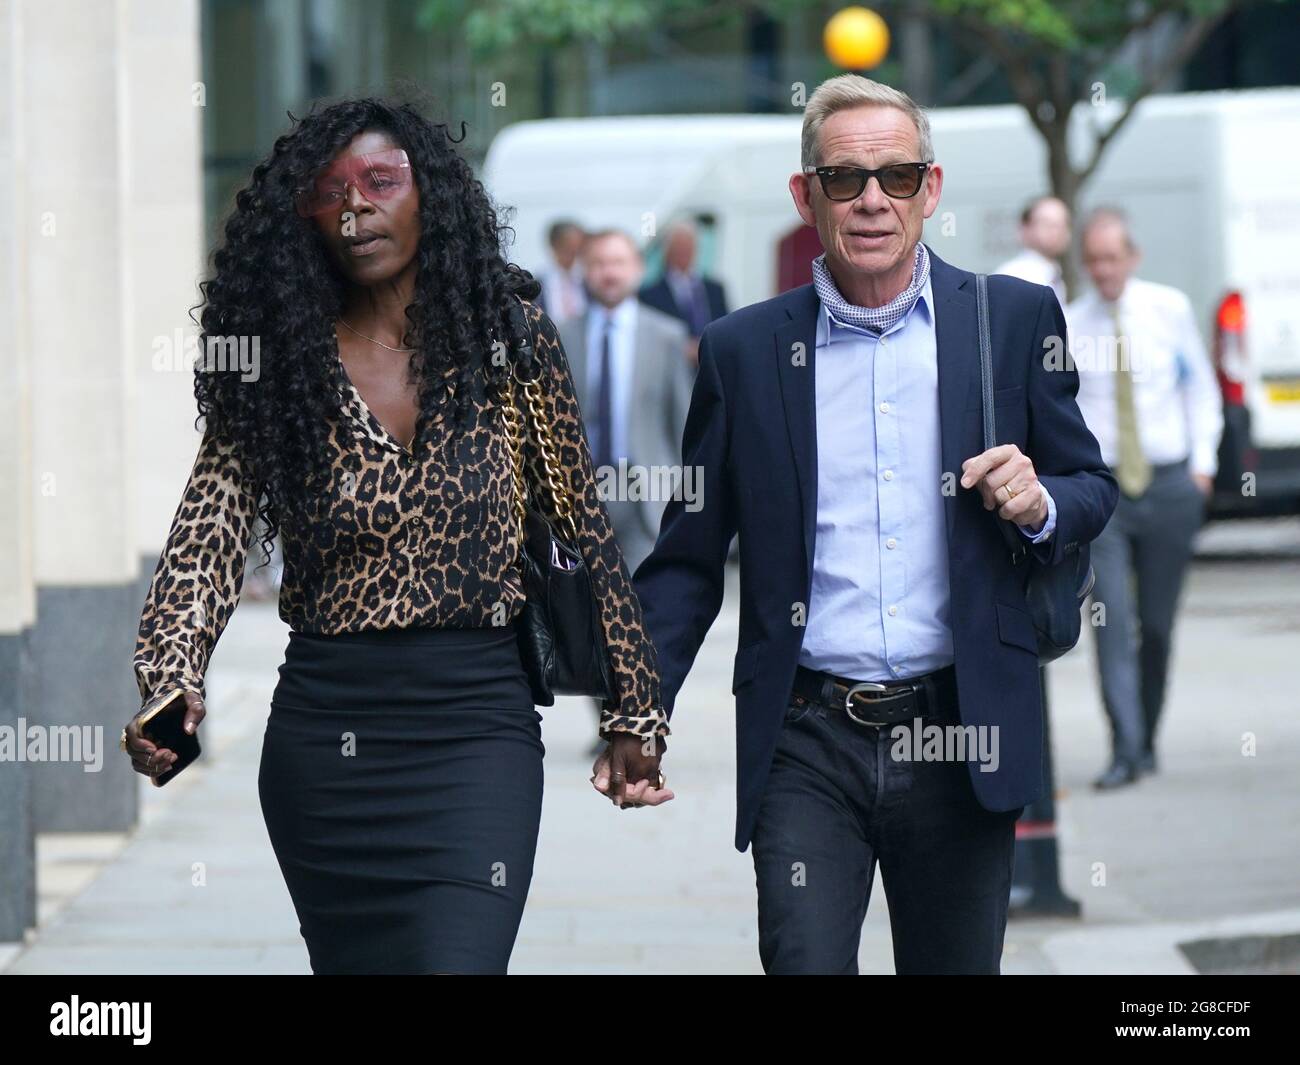 Paul Cook with his wife Jeni arriving at the Rolls Building at the Hight Court, London, for a hearing between two former Sex Pistols band members and the frontman over the